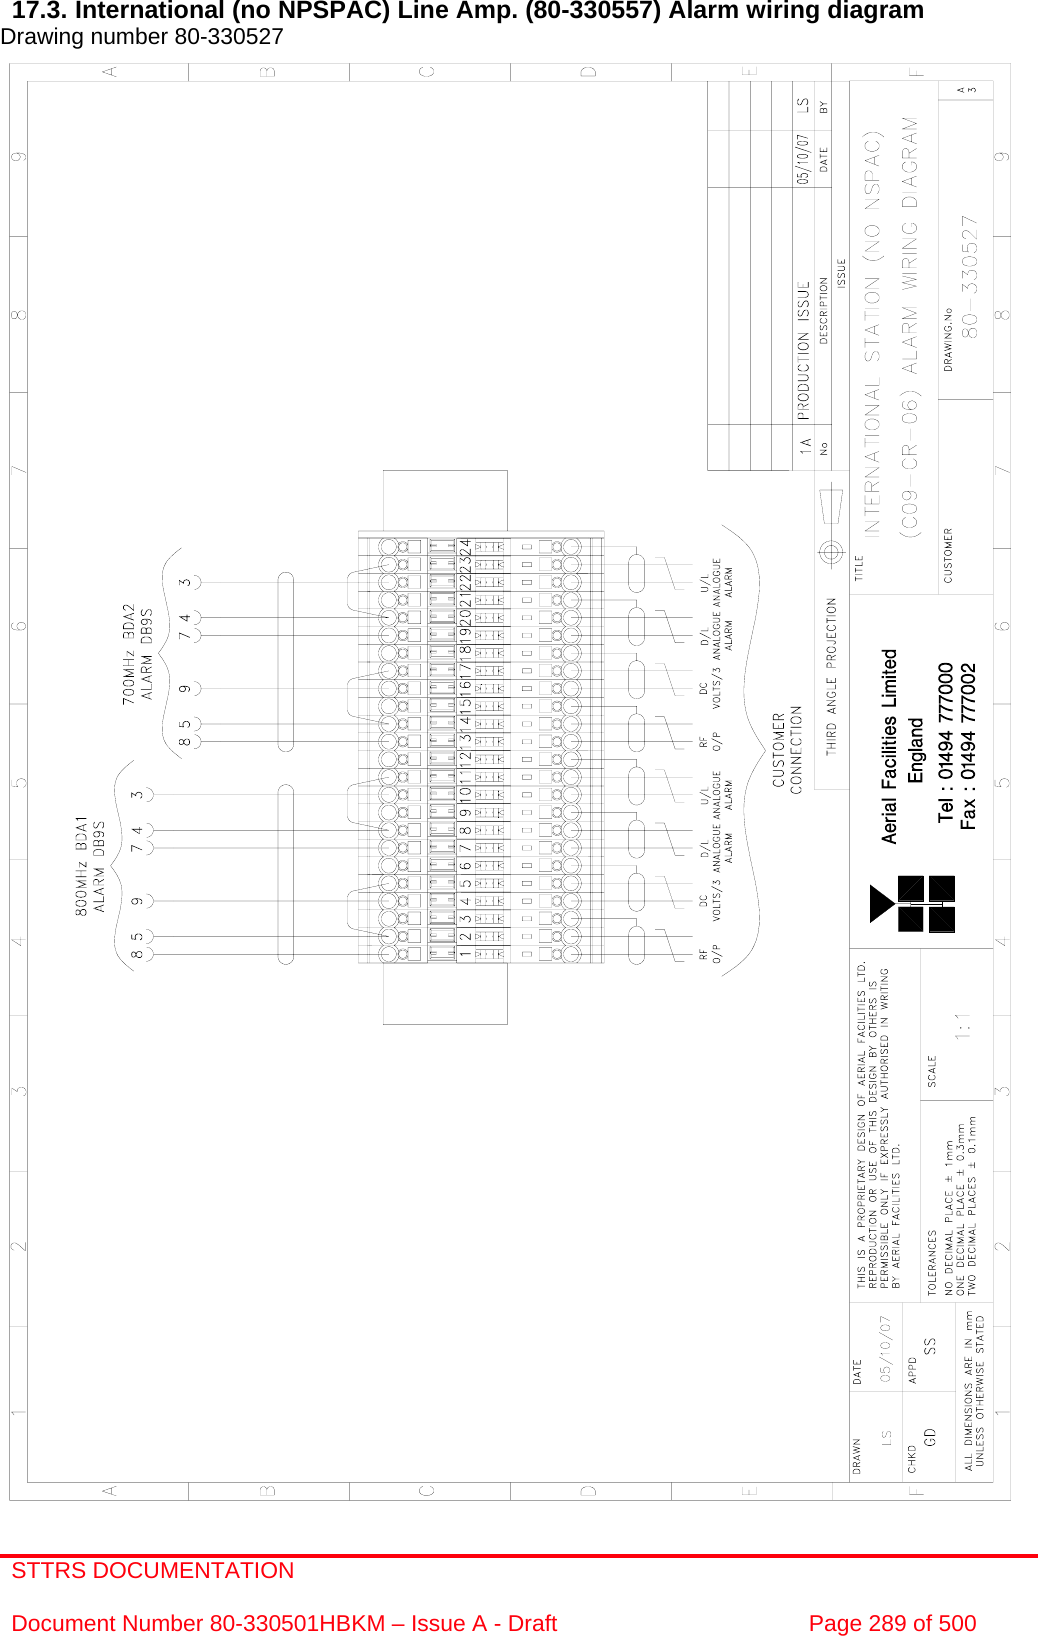 STTRS DOCUMENTATION  Document Number 80-330501HBKM – Issue A - Draft  Page 289 of 500   17.3. International (no NPSPAC) Line Amp. (80-330557) Alarm wiring diagram Drawing number 80-330527                                                      